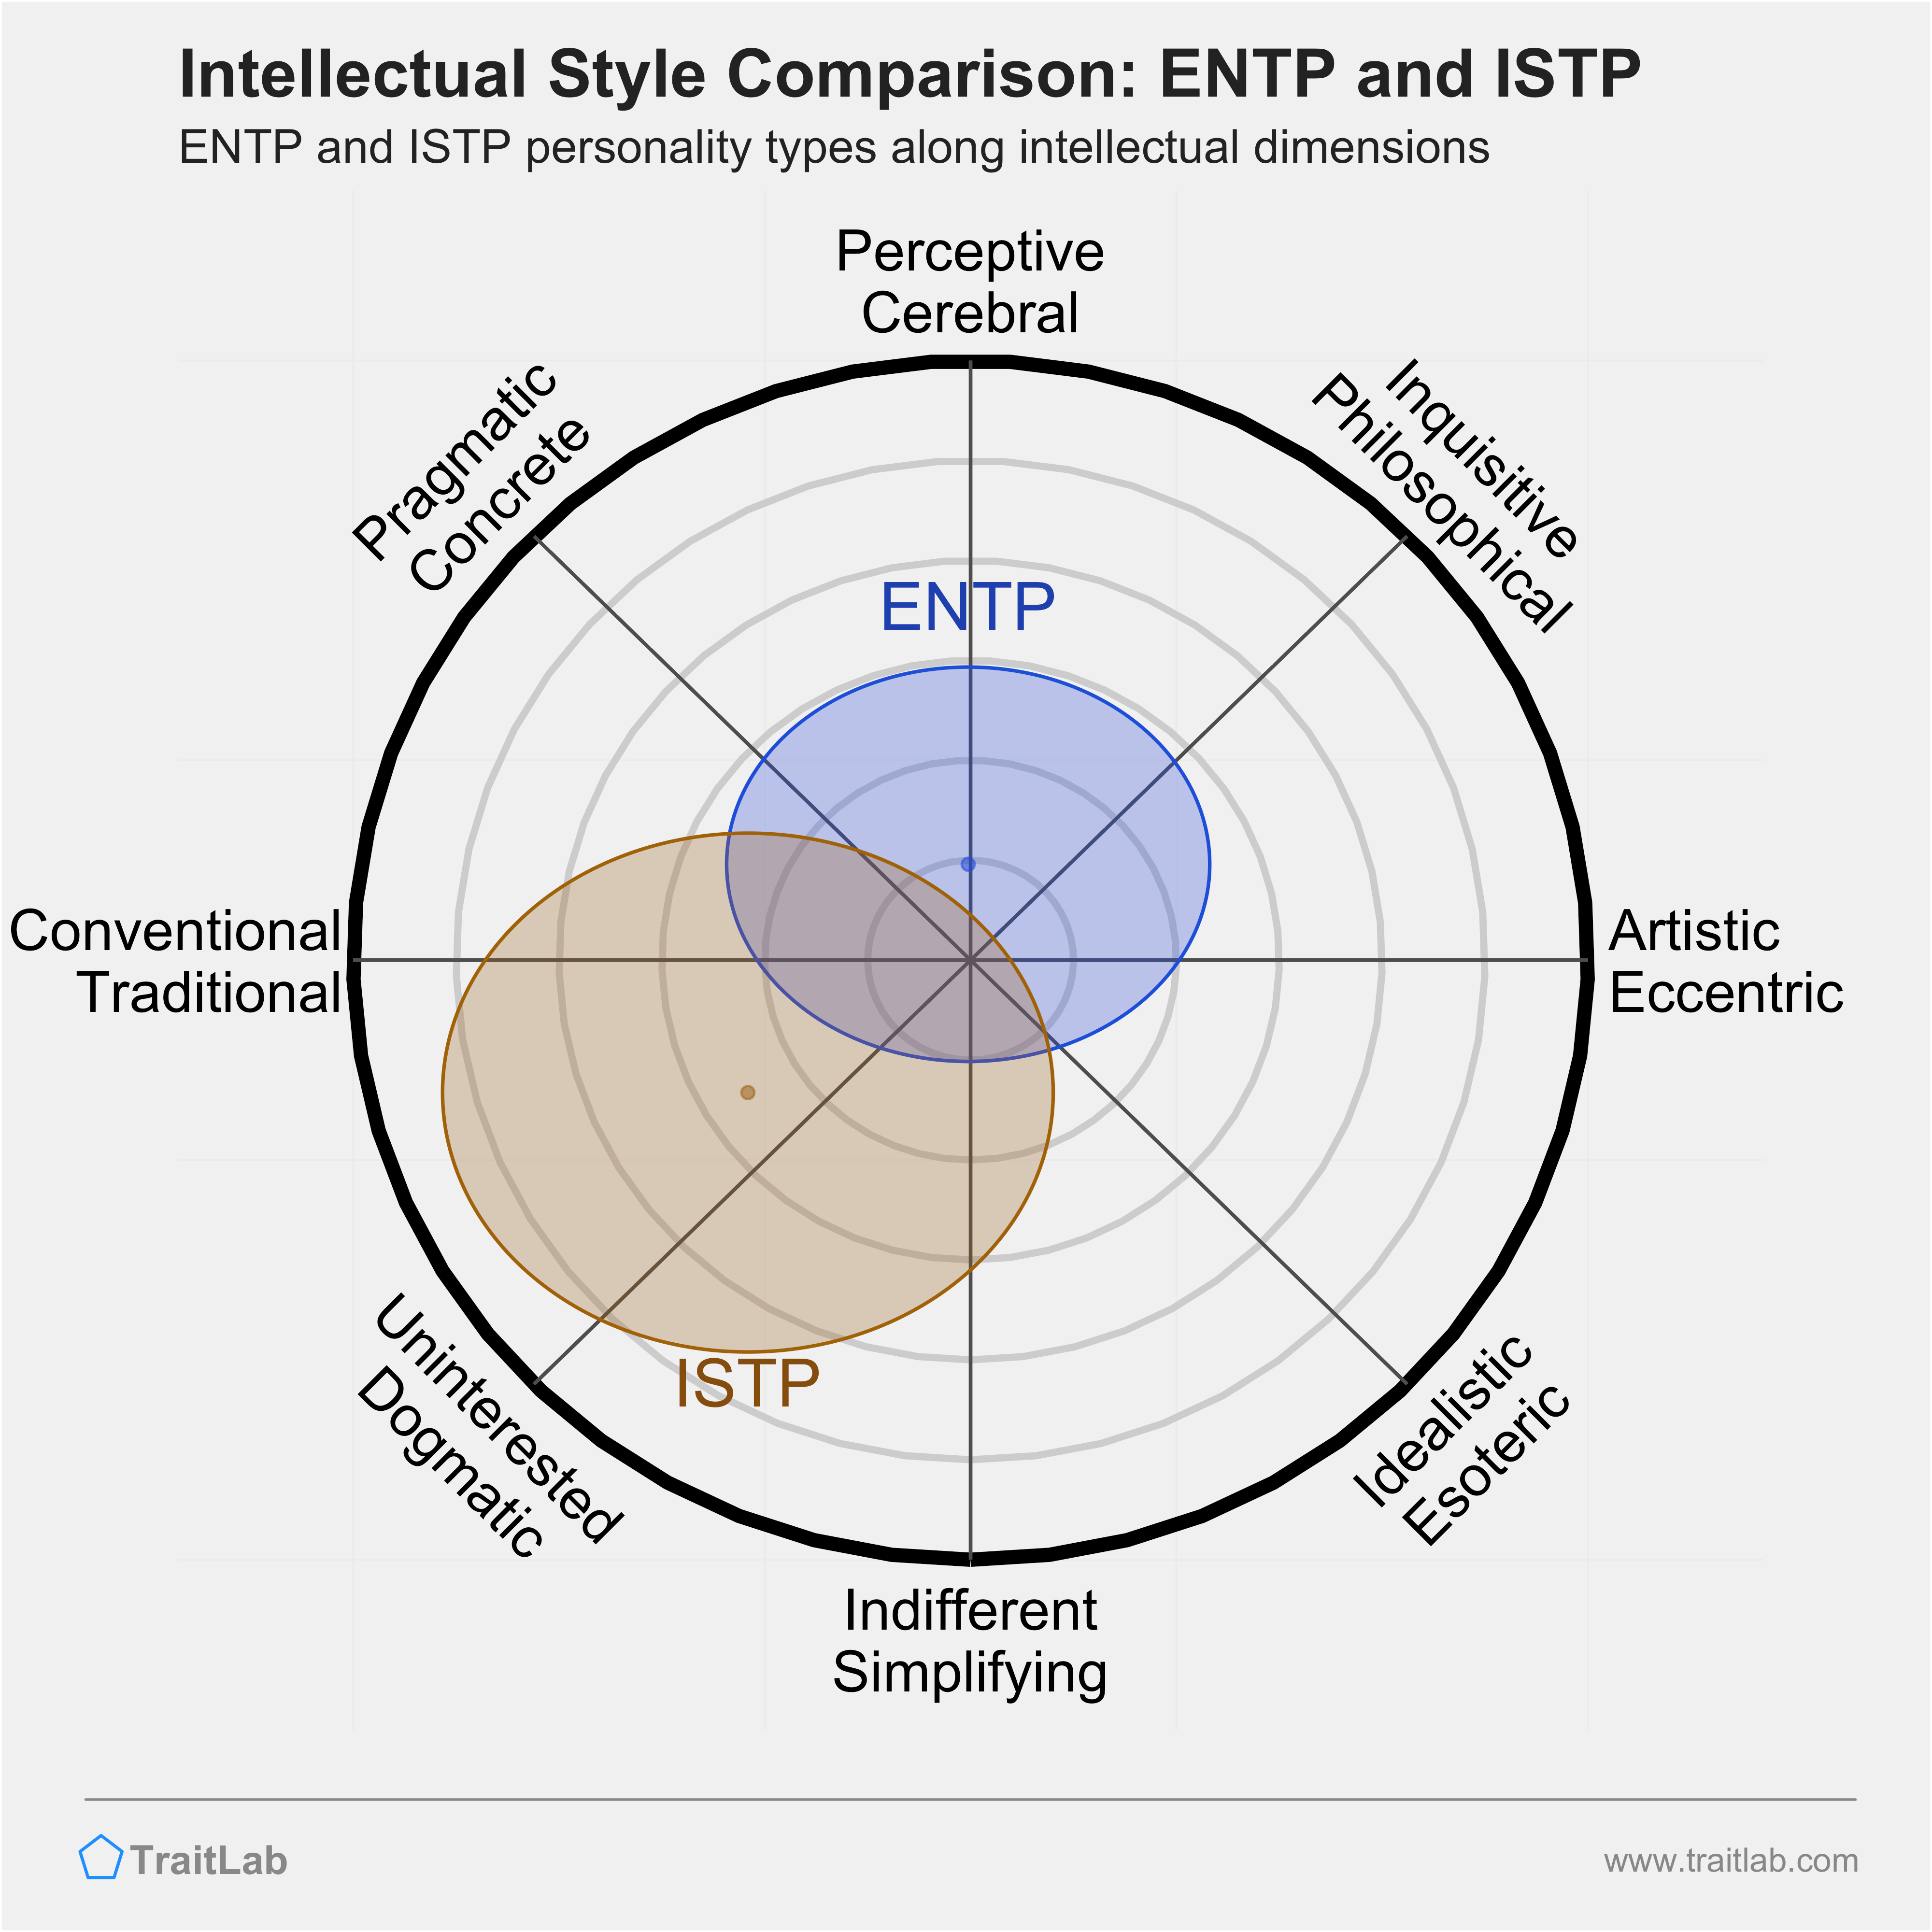 ENTP and ISTP comparison across intellectual dimensions